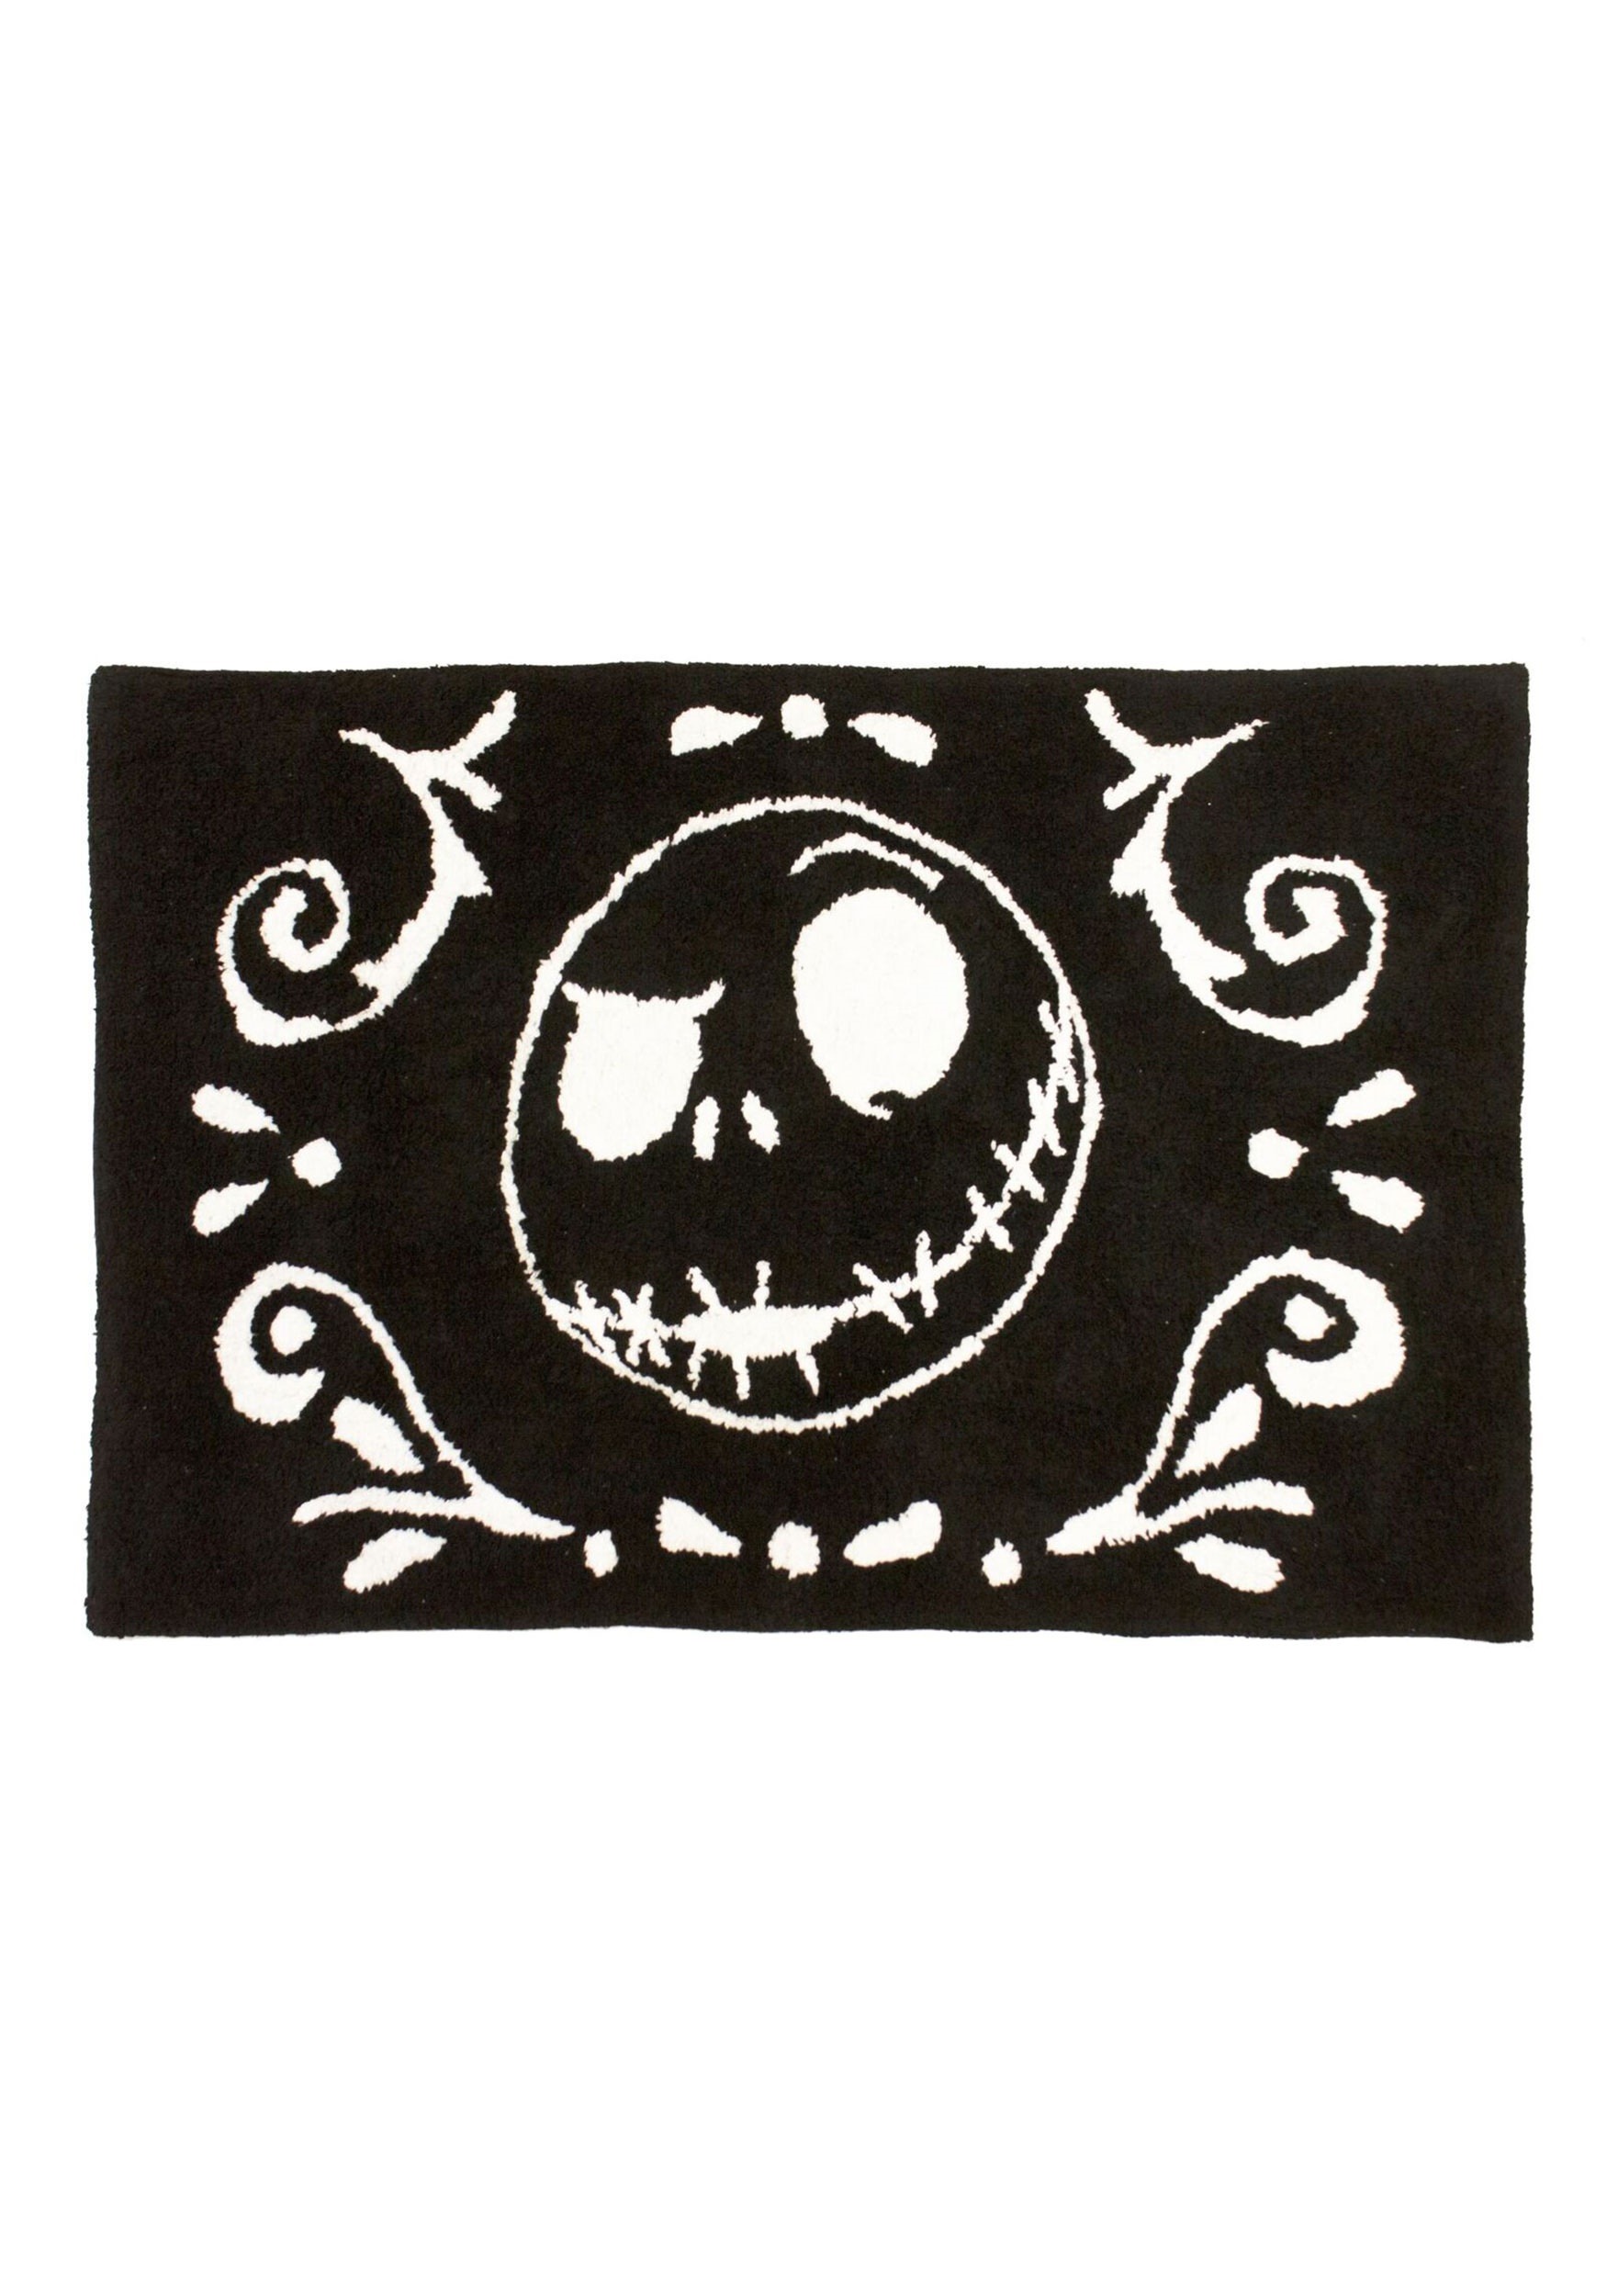 Meant To Be Cotton Tuft Bath Rug Nightmare Before Christmas